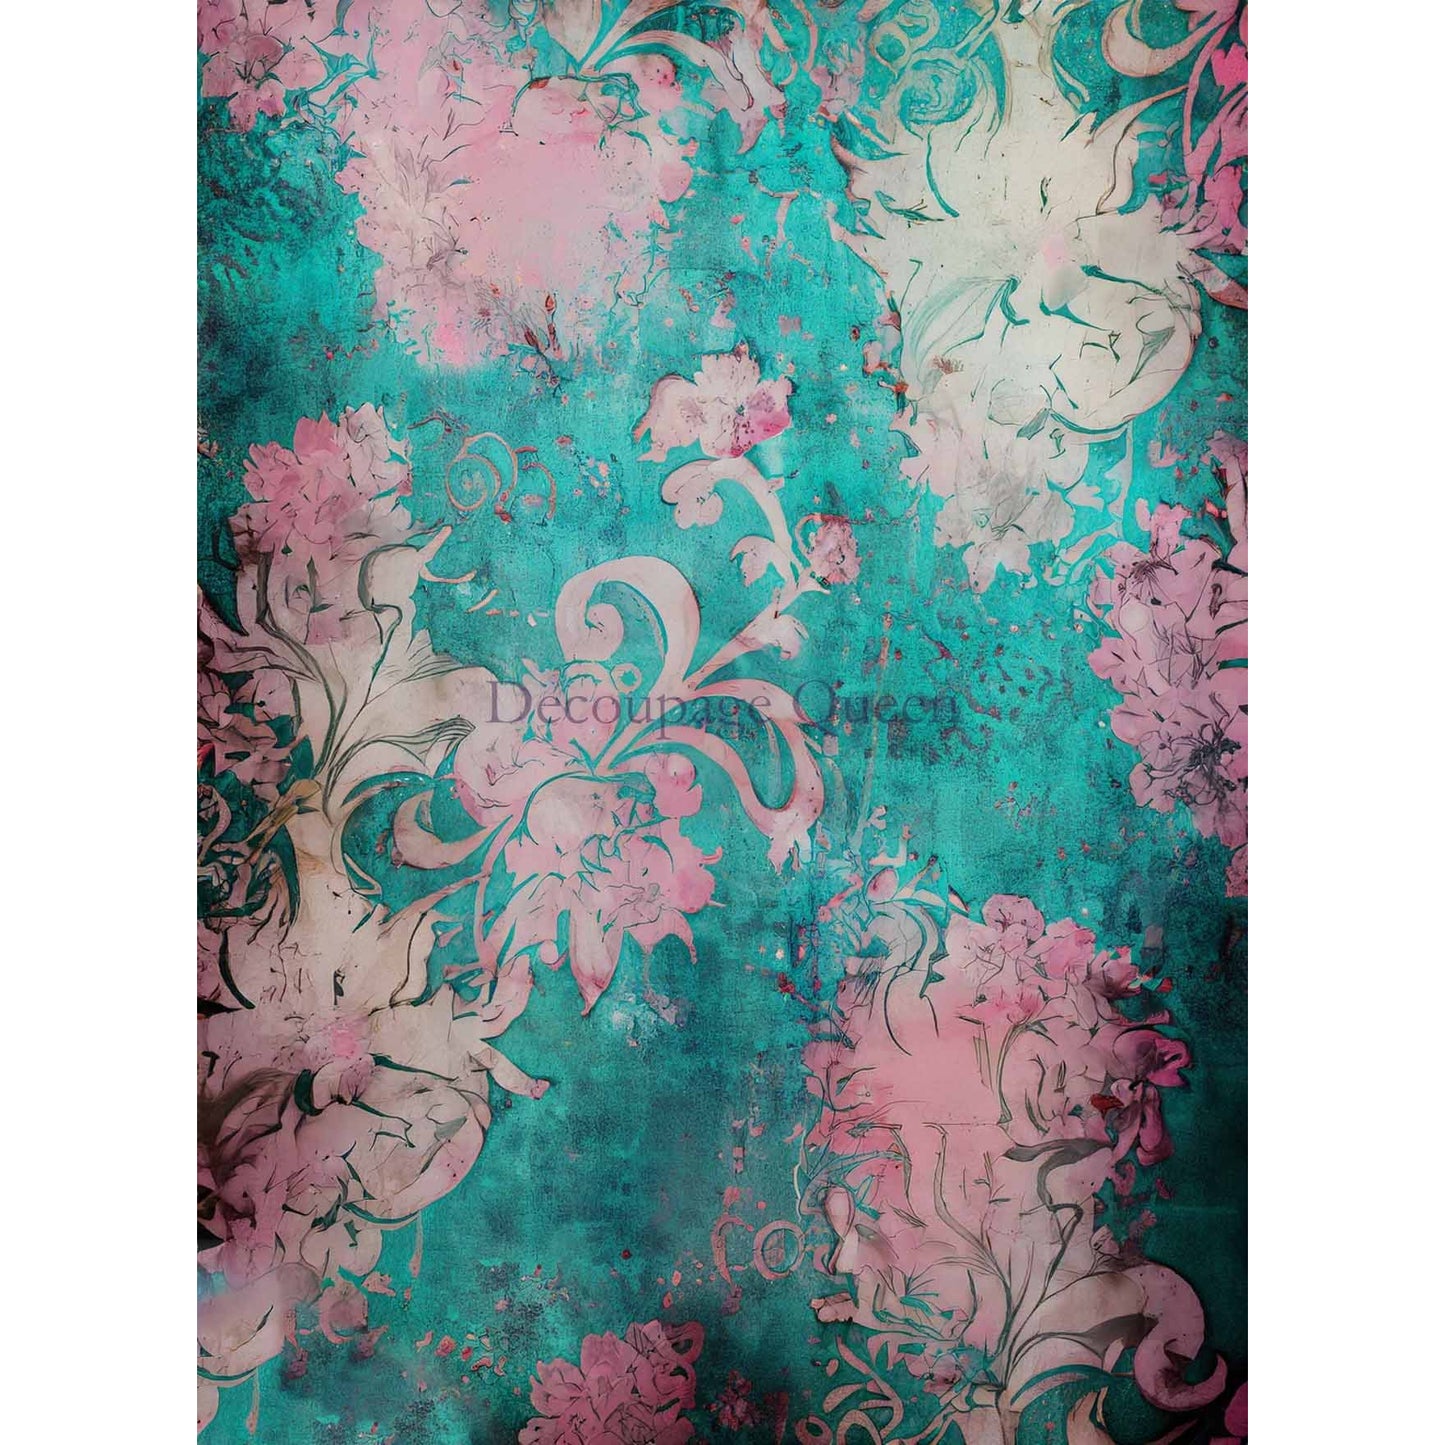 0435 - Rice Paper - Decoupage Queen - Andy Skinner Tattered Teal